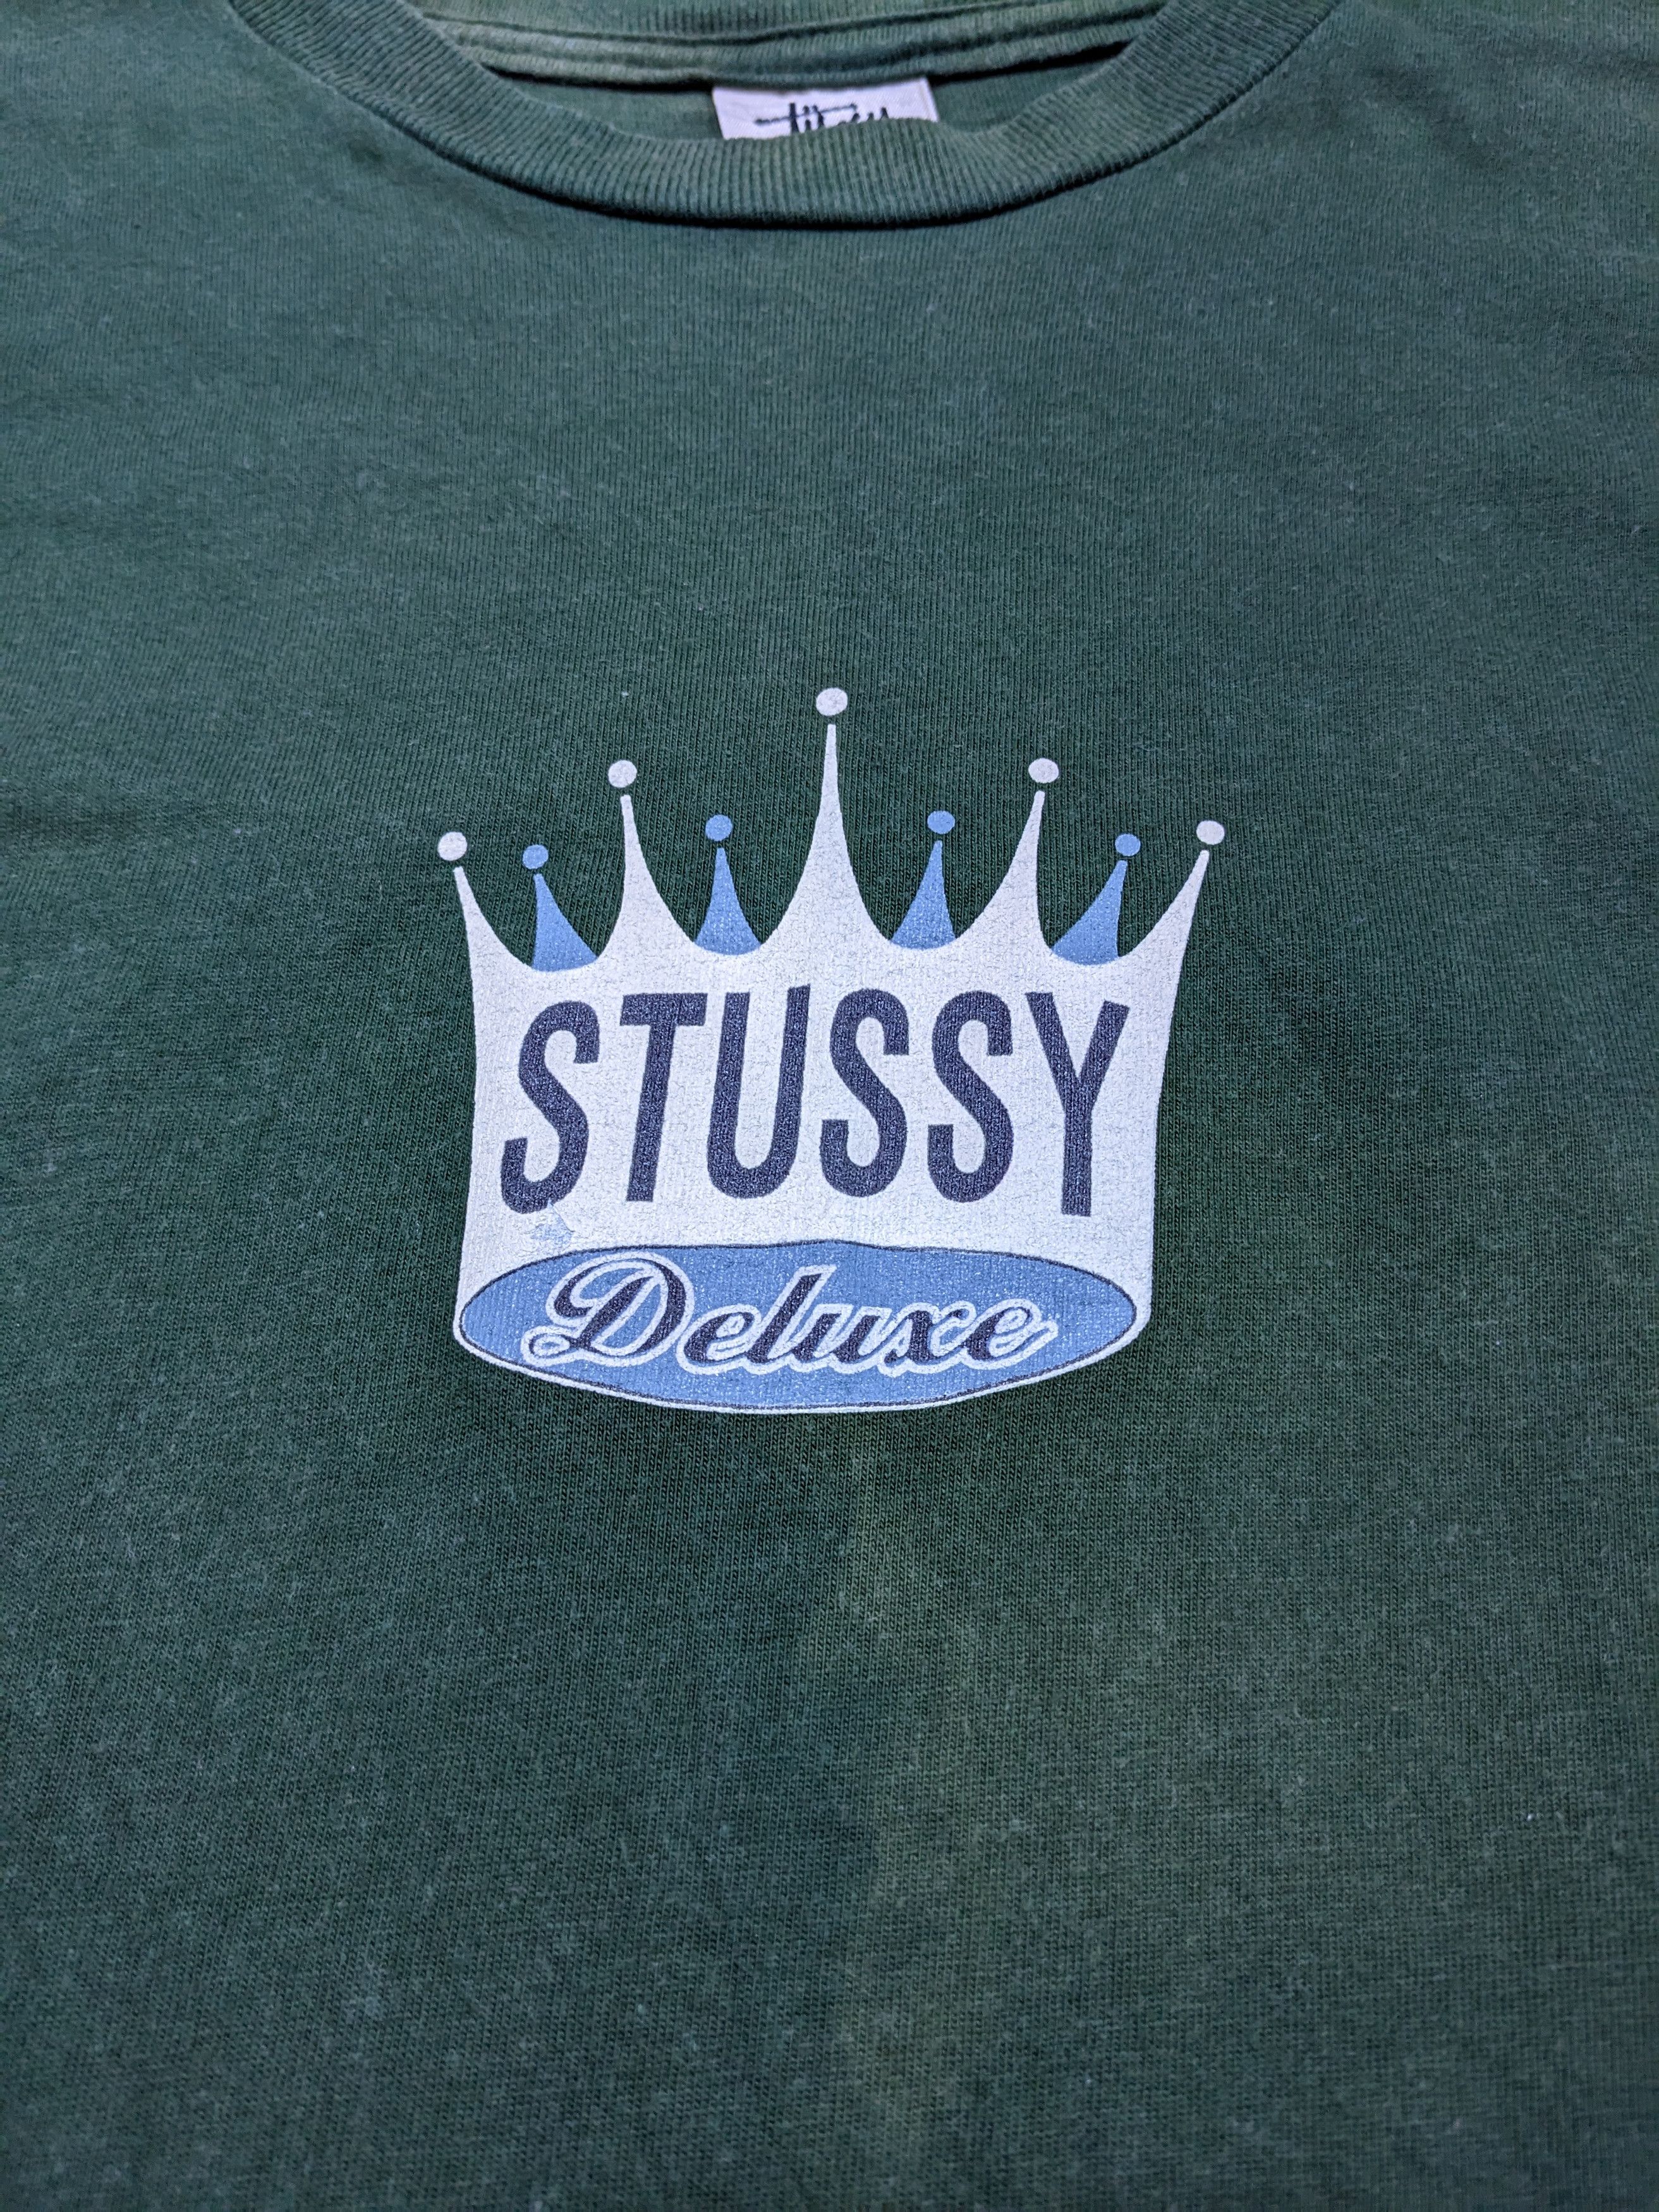 RARE Vintage 90s Stussy Deluxe Crown Center Logo Tee - 4